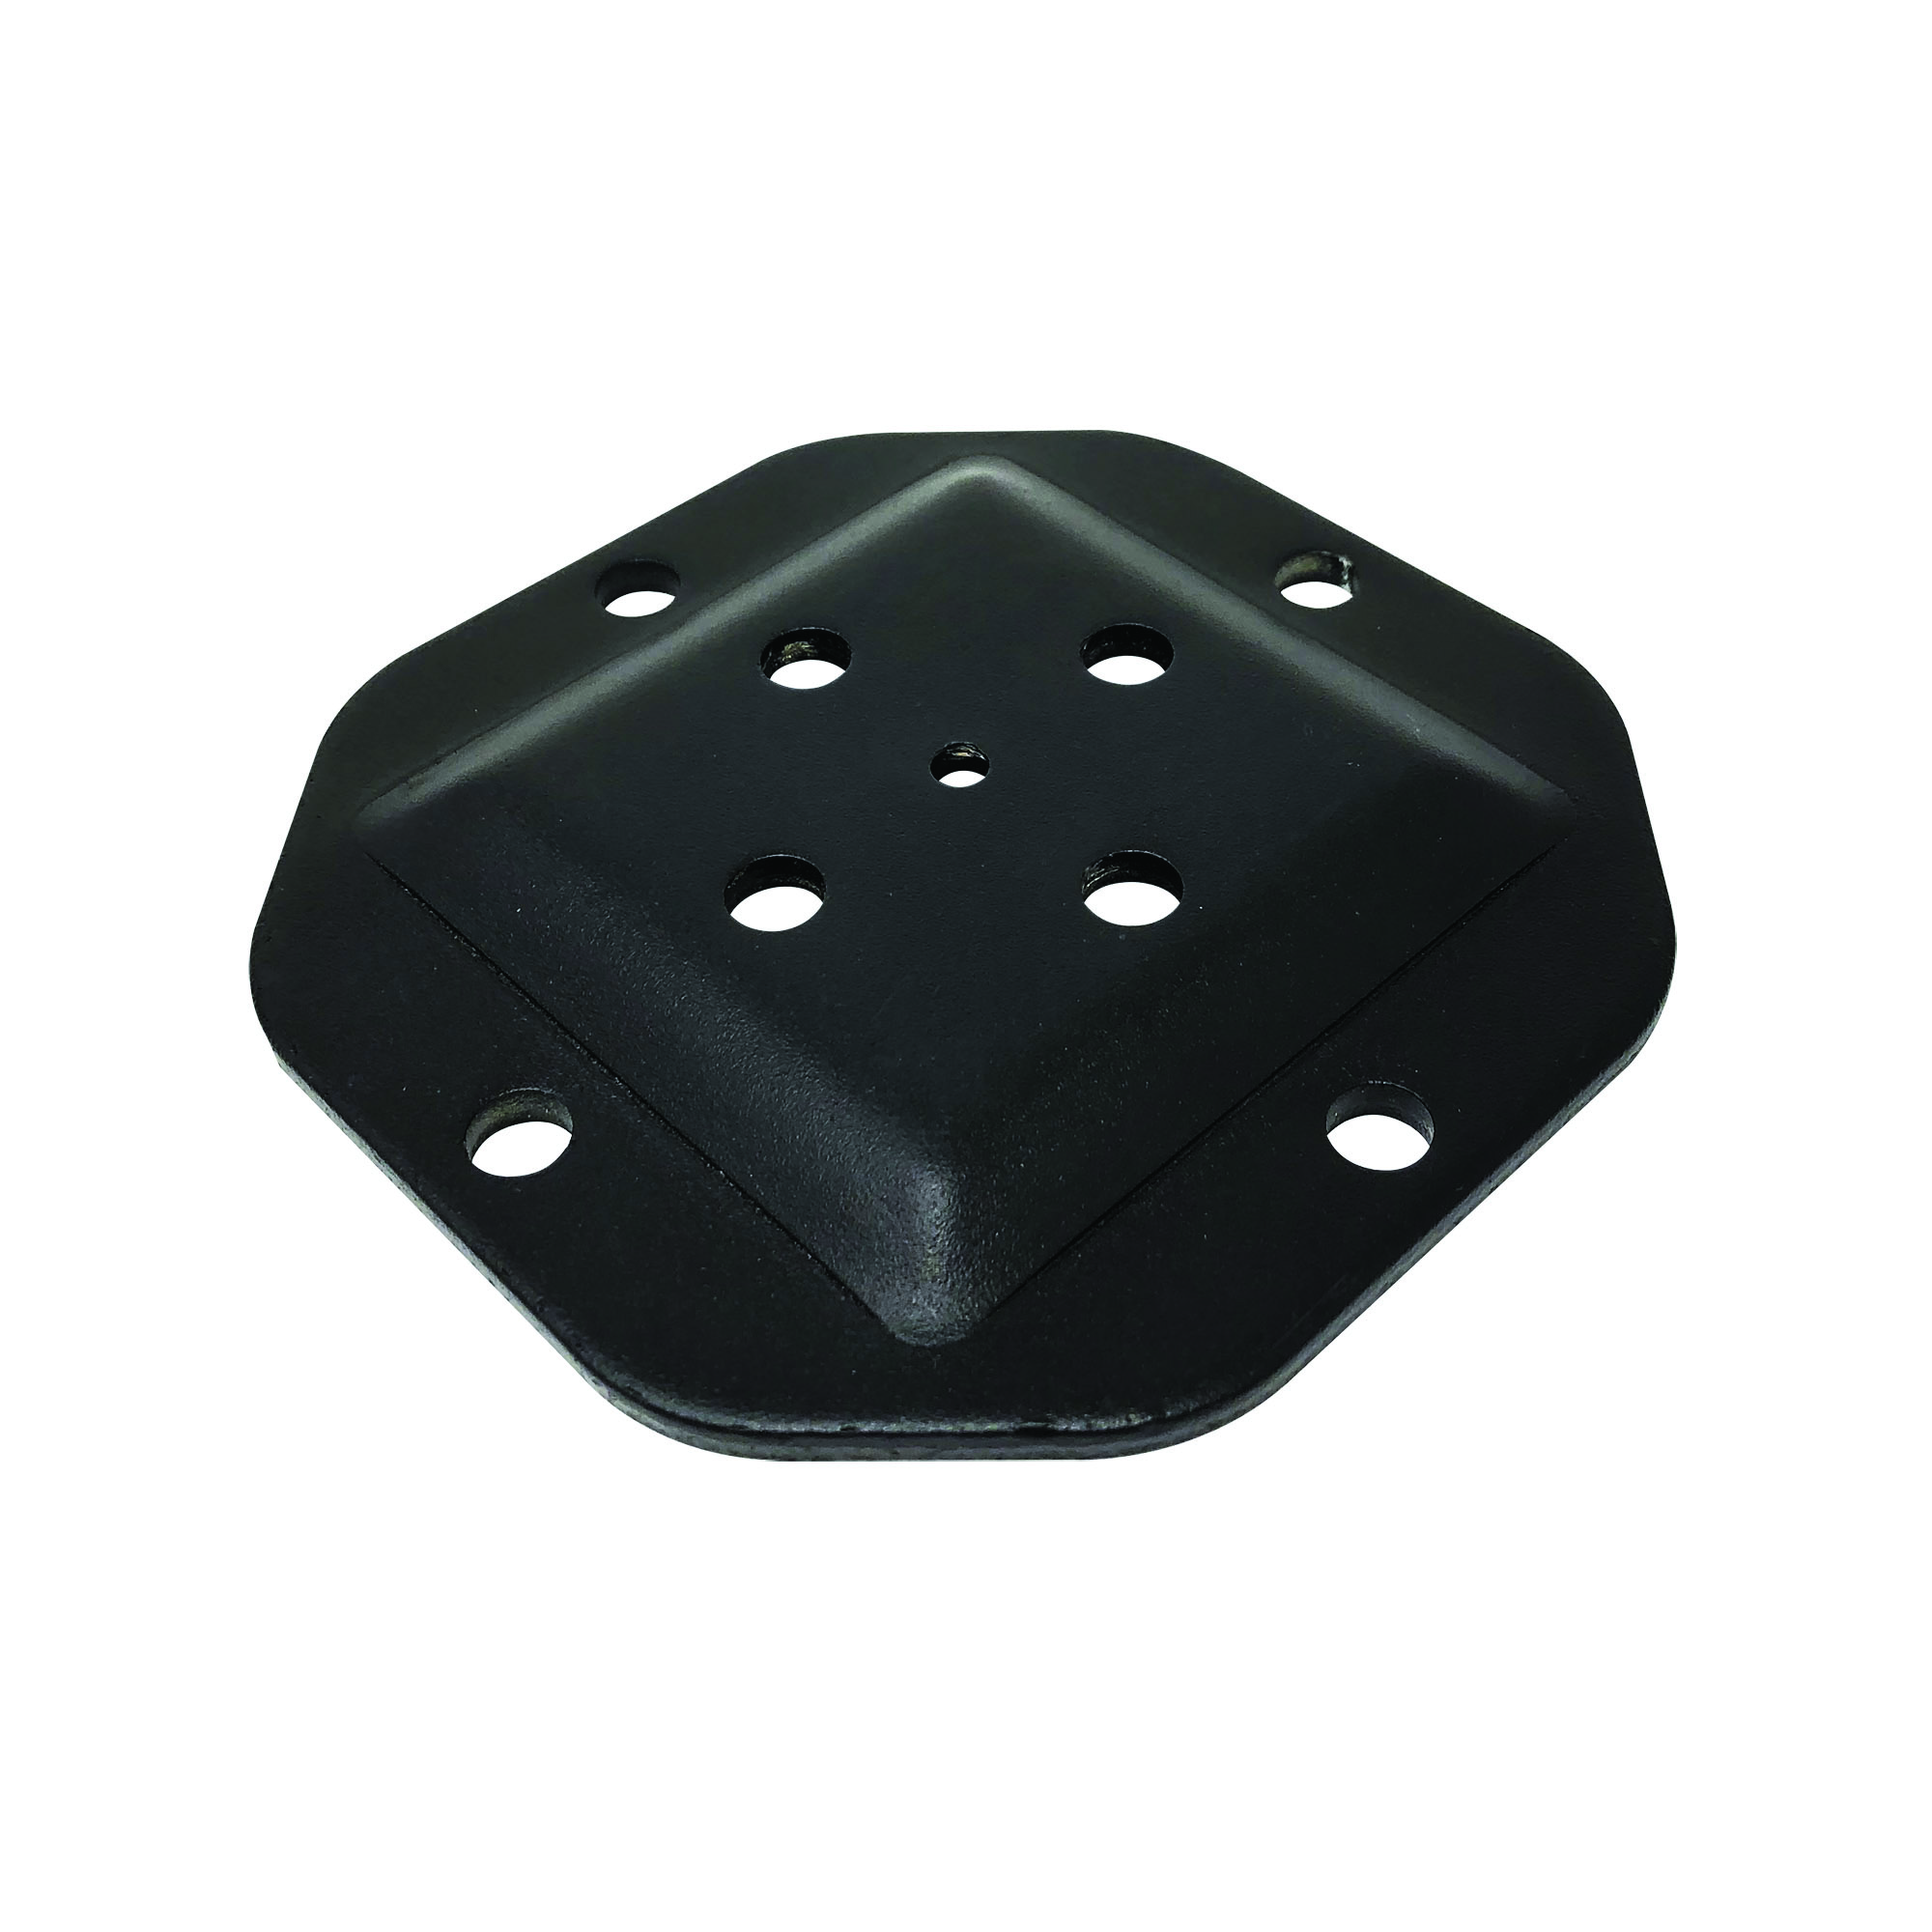 A black 4 by 4 heavy duty wood post connector plate.